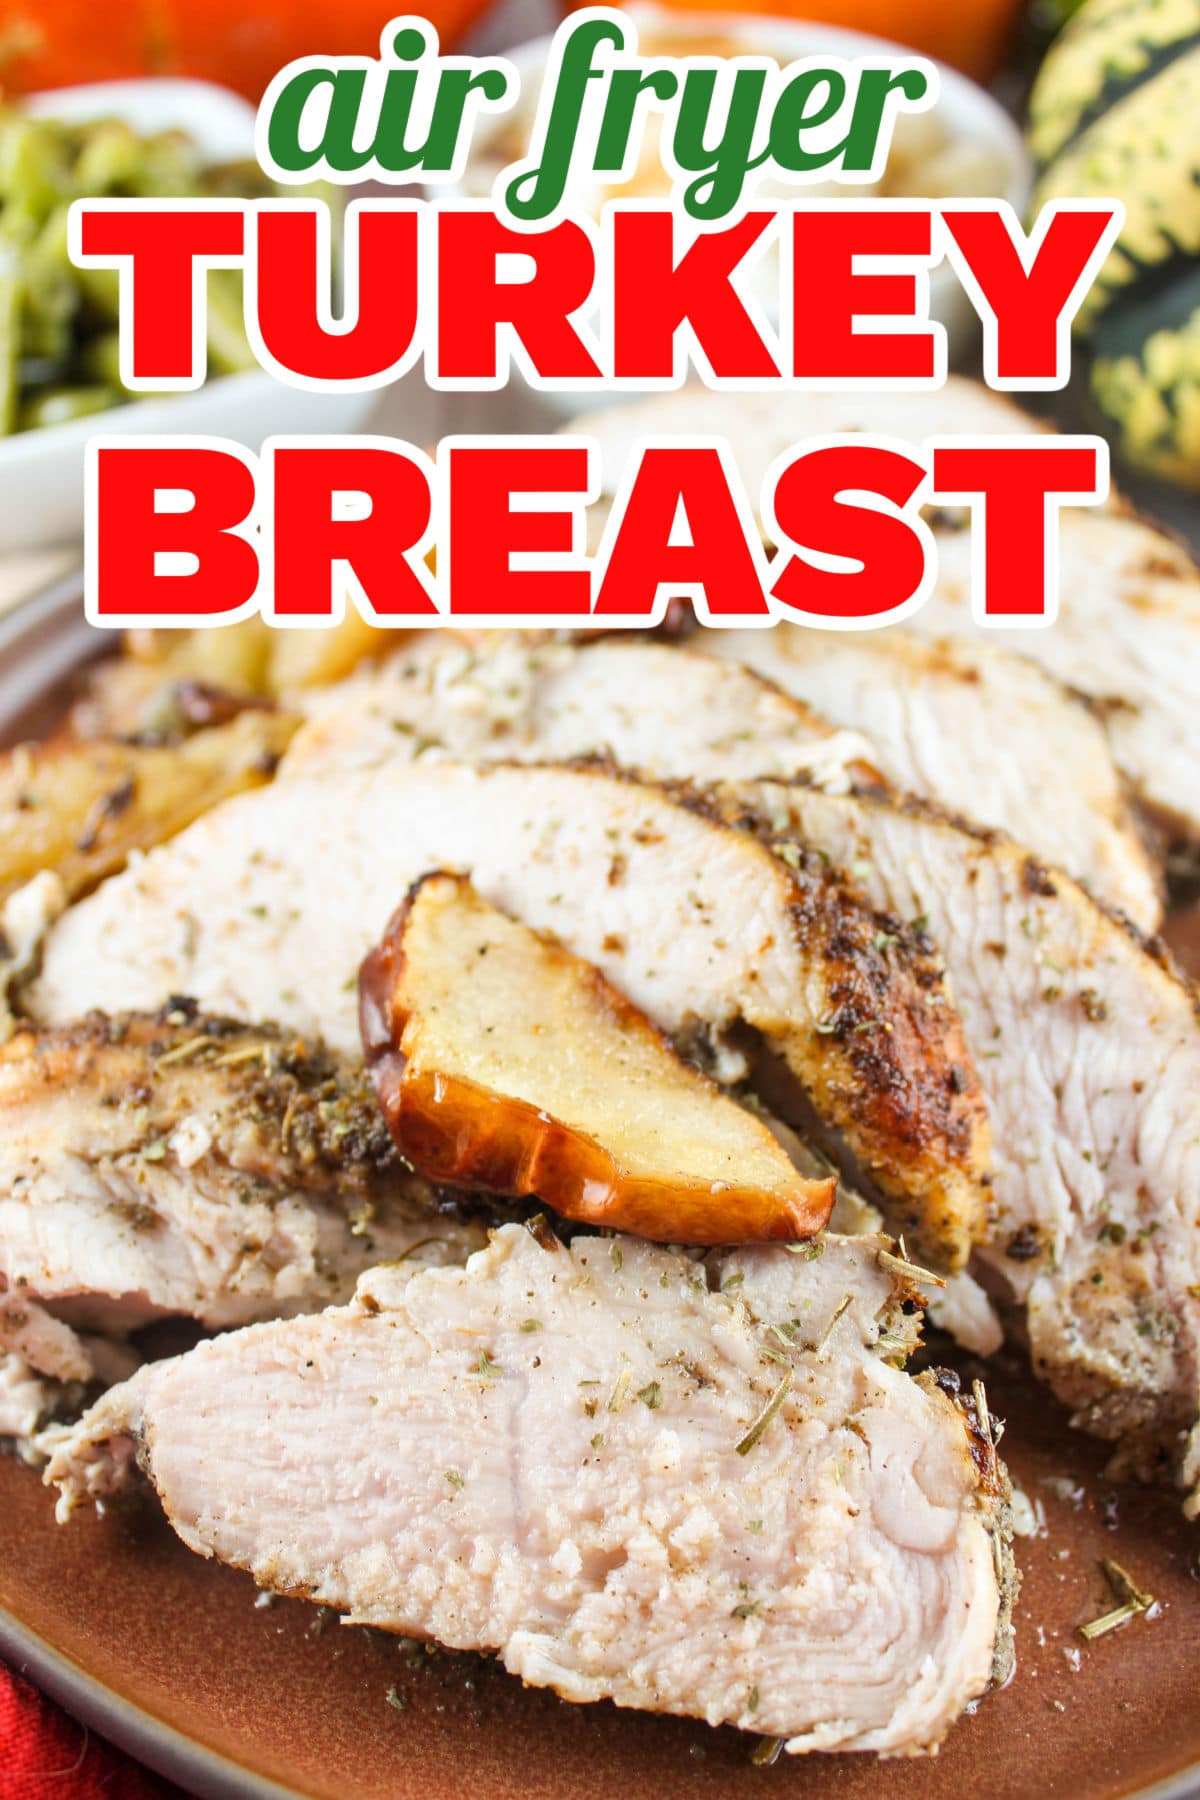 Making this Air Fryer Turkey Breast will make the holidays SIMPLE!!! And - making it in the air fryer means it's quick too - half the time of making it in the oven! My favorite part of this recipe is the aroma!! When you crack open those spices - it just smells like a holiday dinner!  via @foodhussy